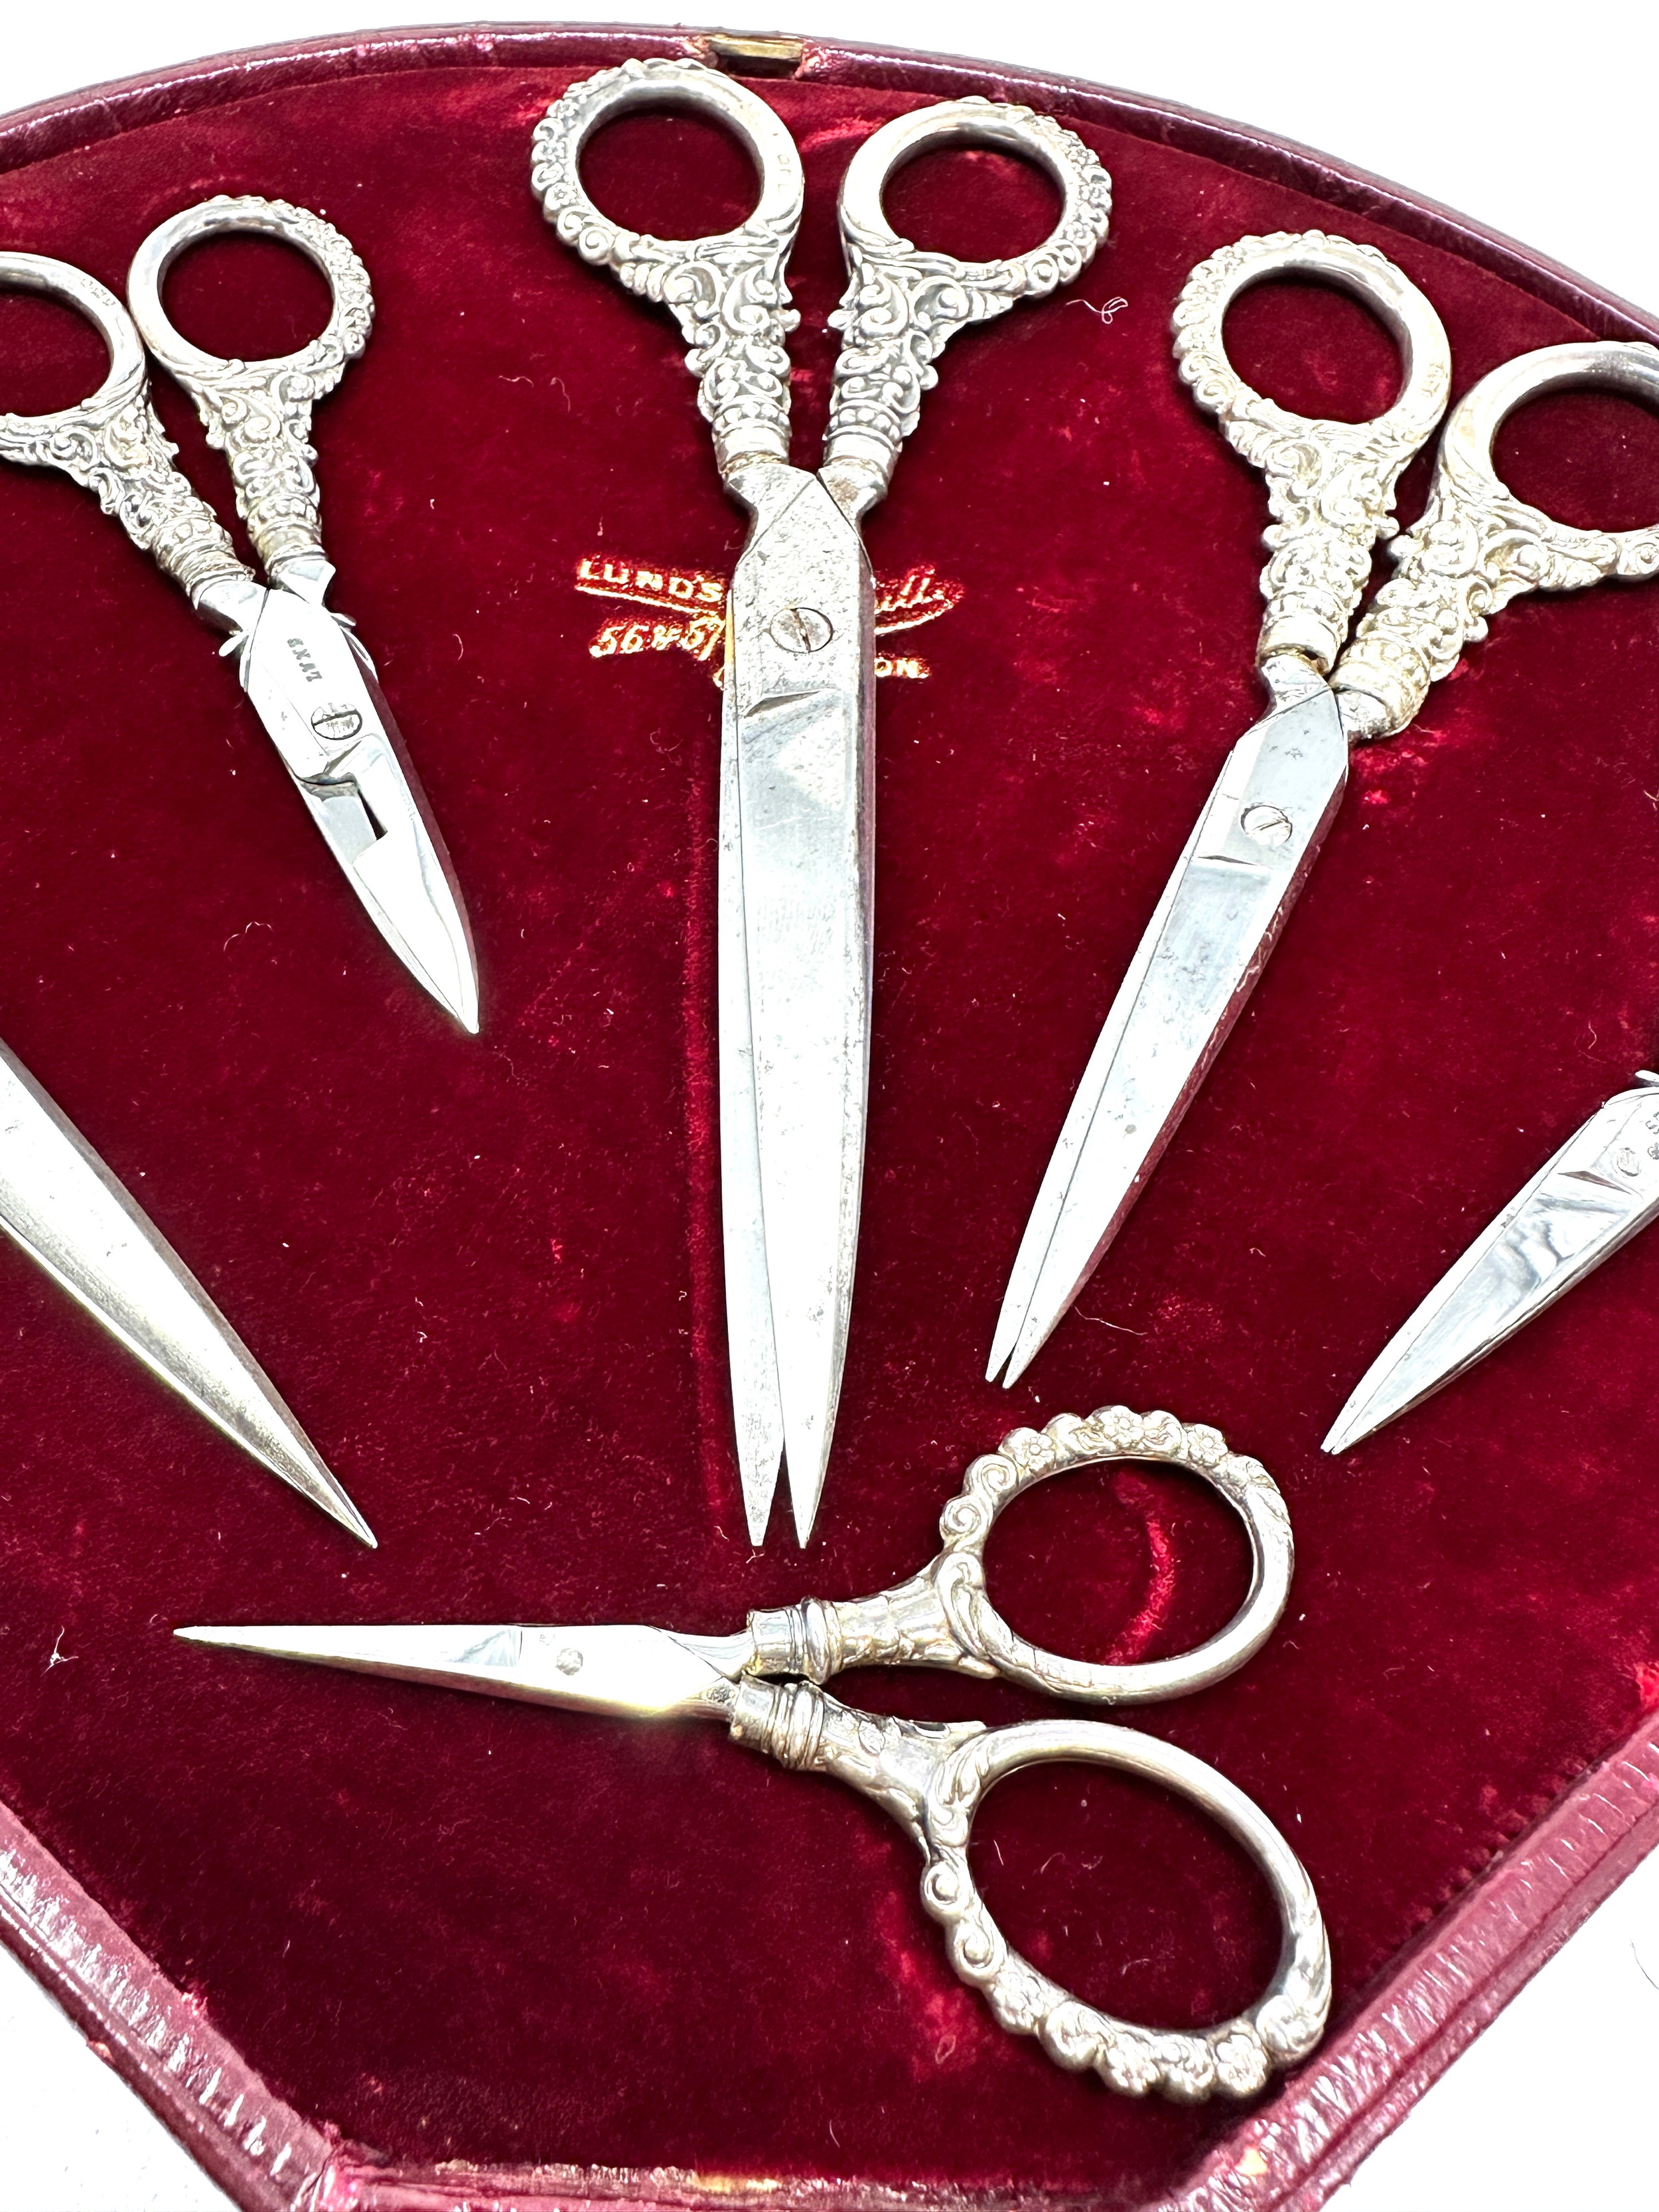 Fine large set of antique silver handle scissors original boxed by Lunds of London - Image 5 of 8